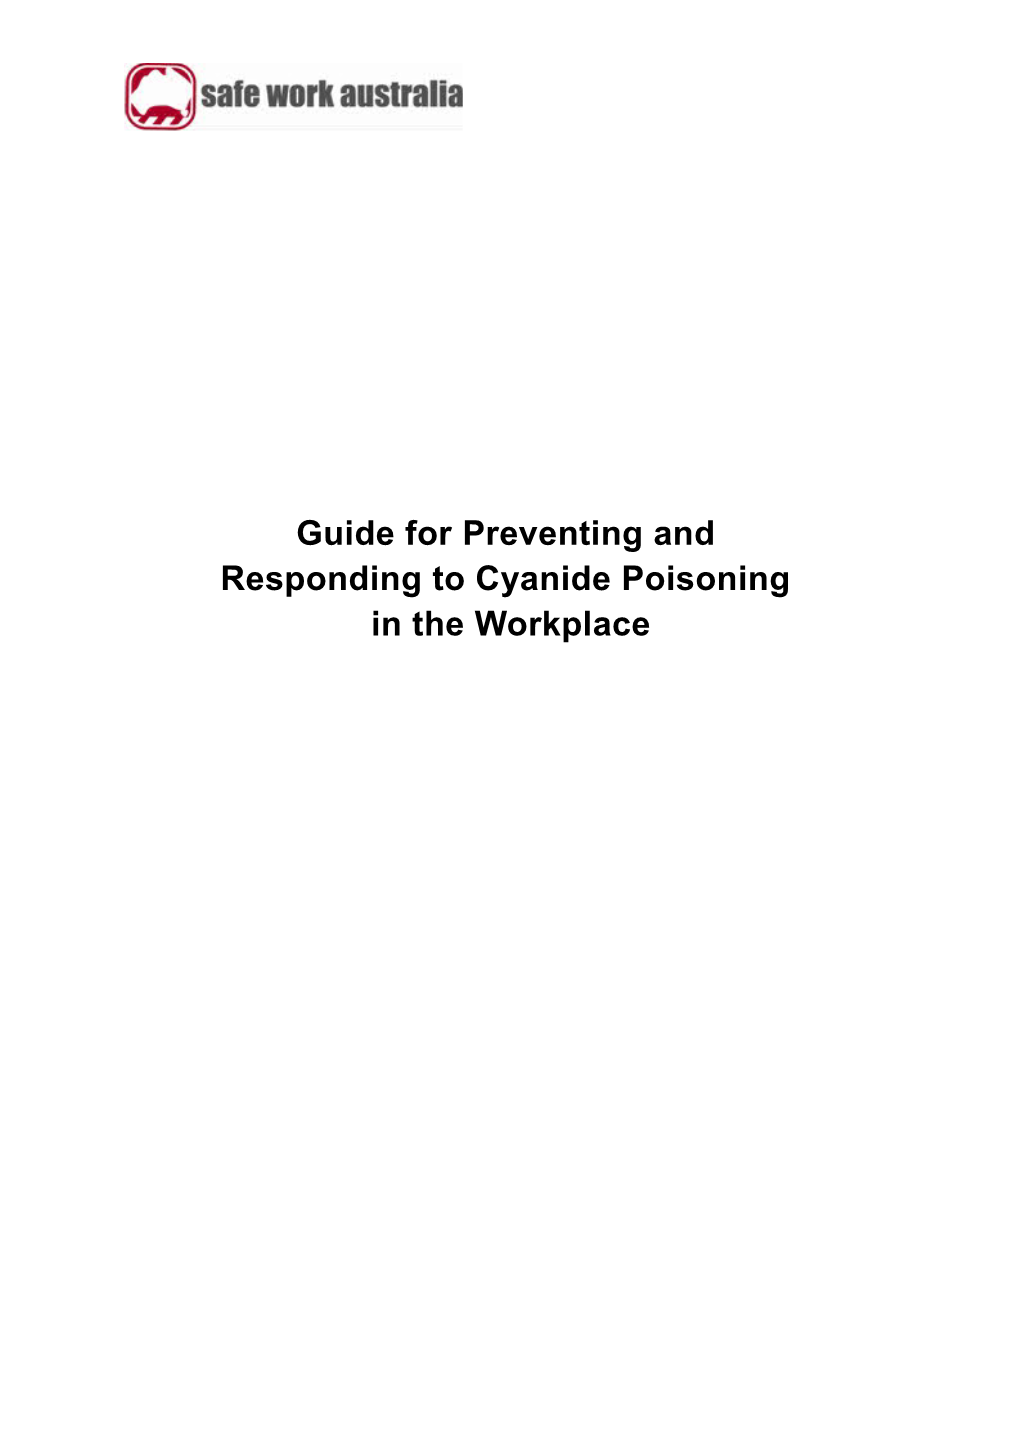 Guide for Preventing and Responding to Cyanide Poisoning in the Workplace